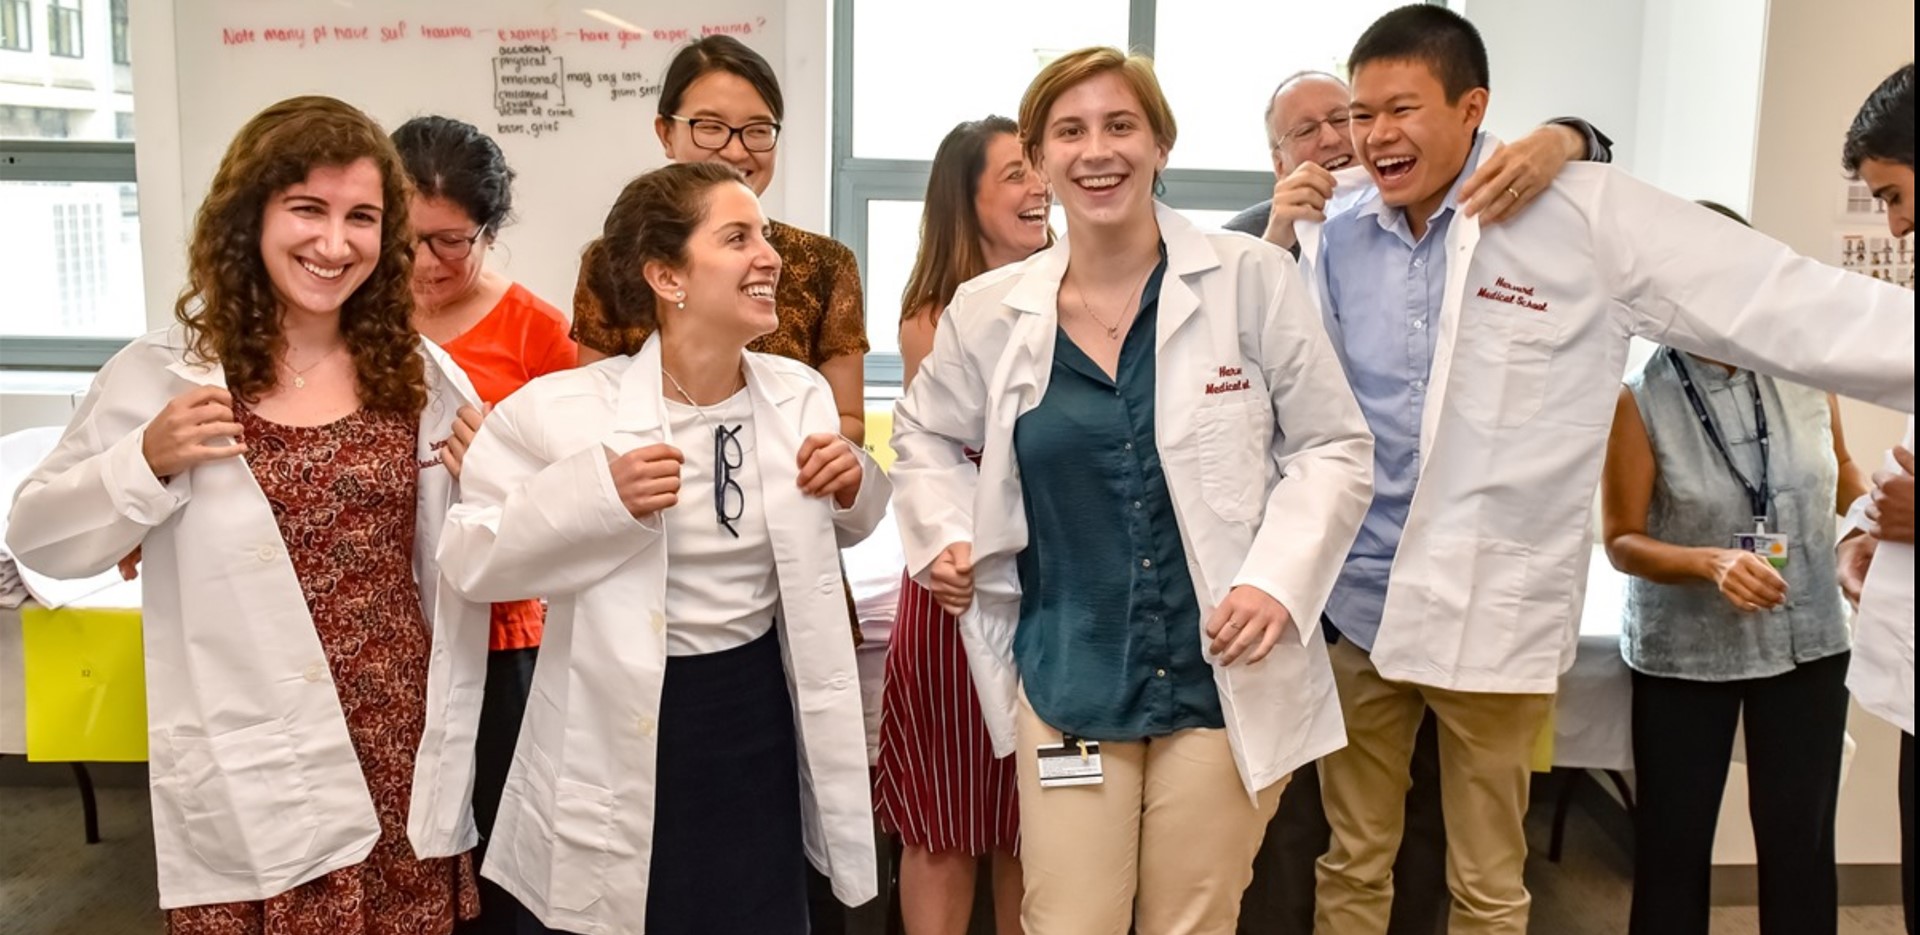 These students are thrilled to have received their white coats. Image: Steve Lipofsky for Harvard Medical School